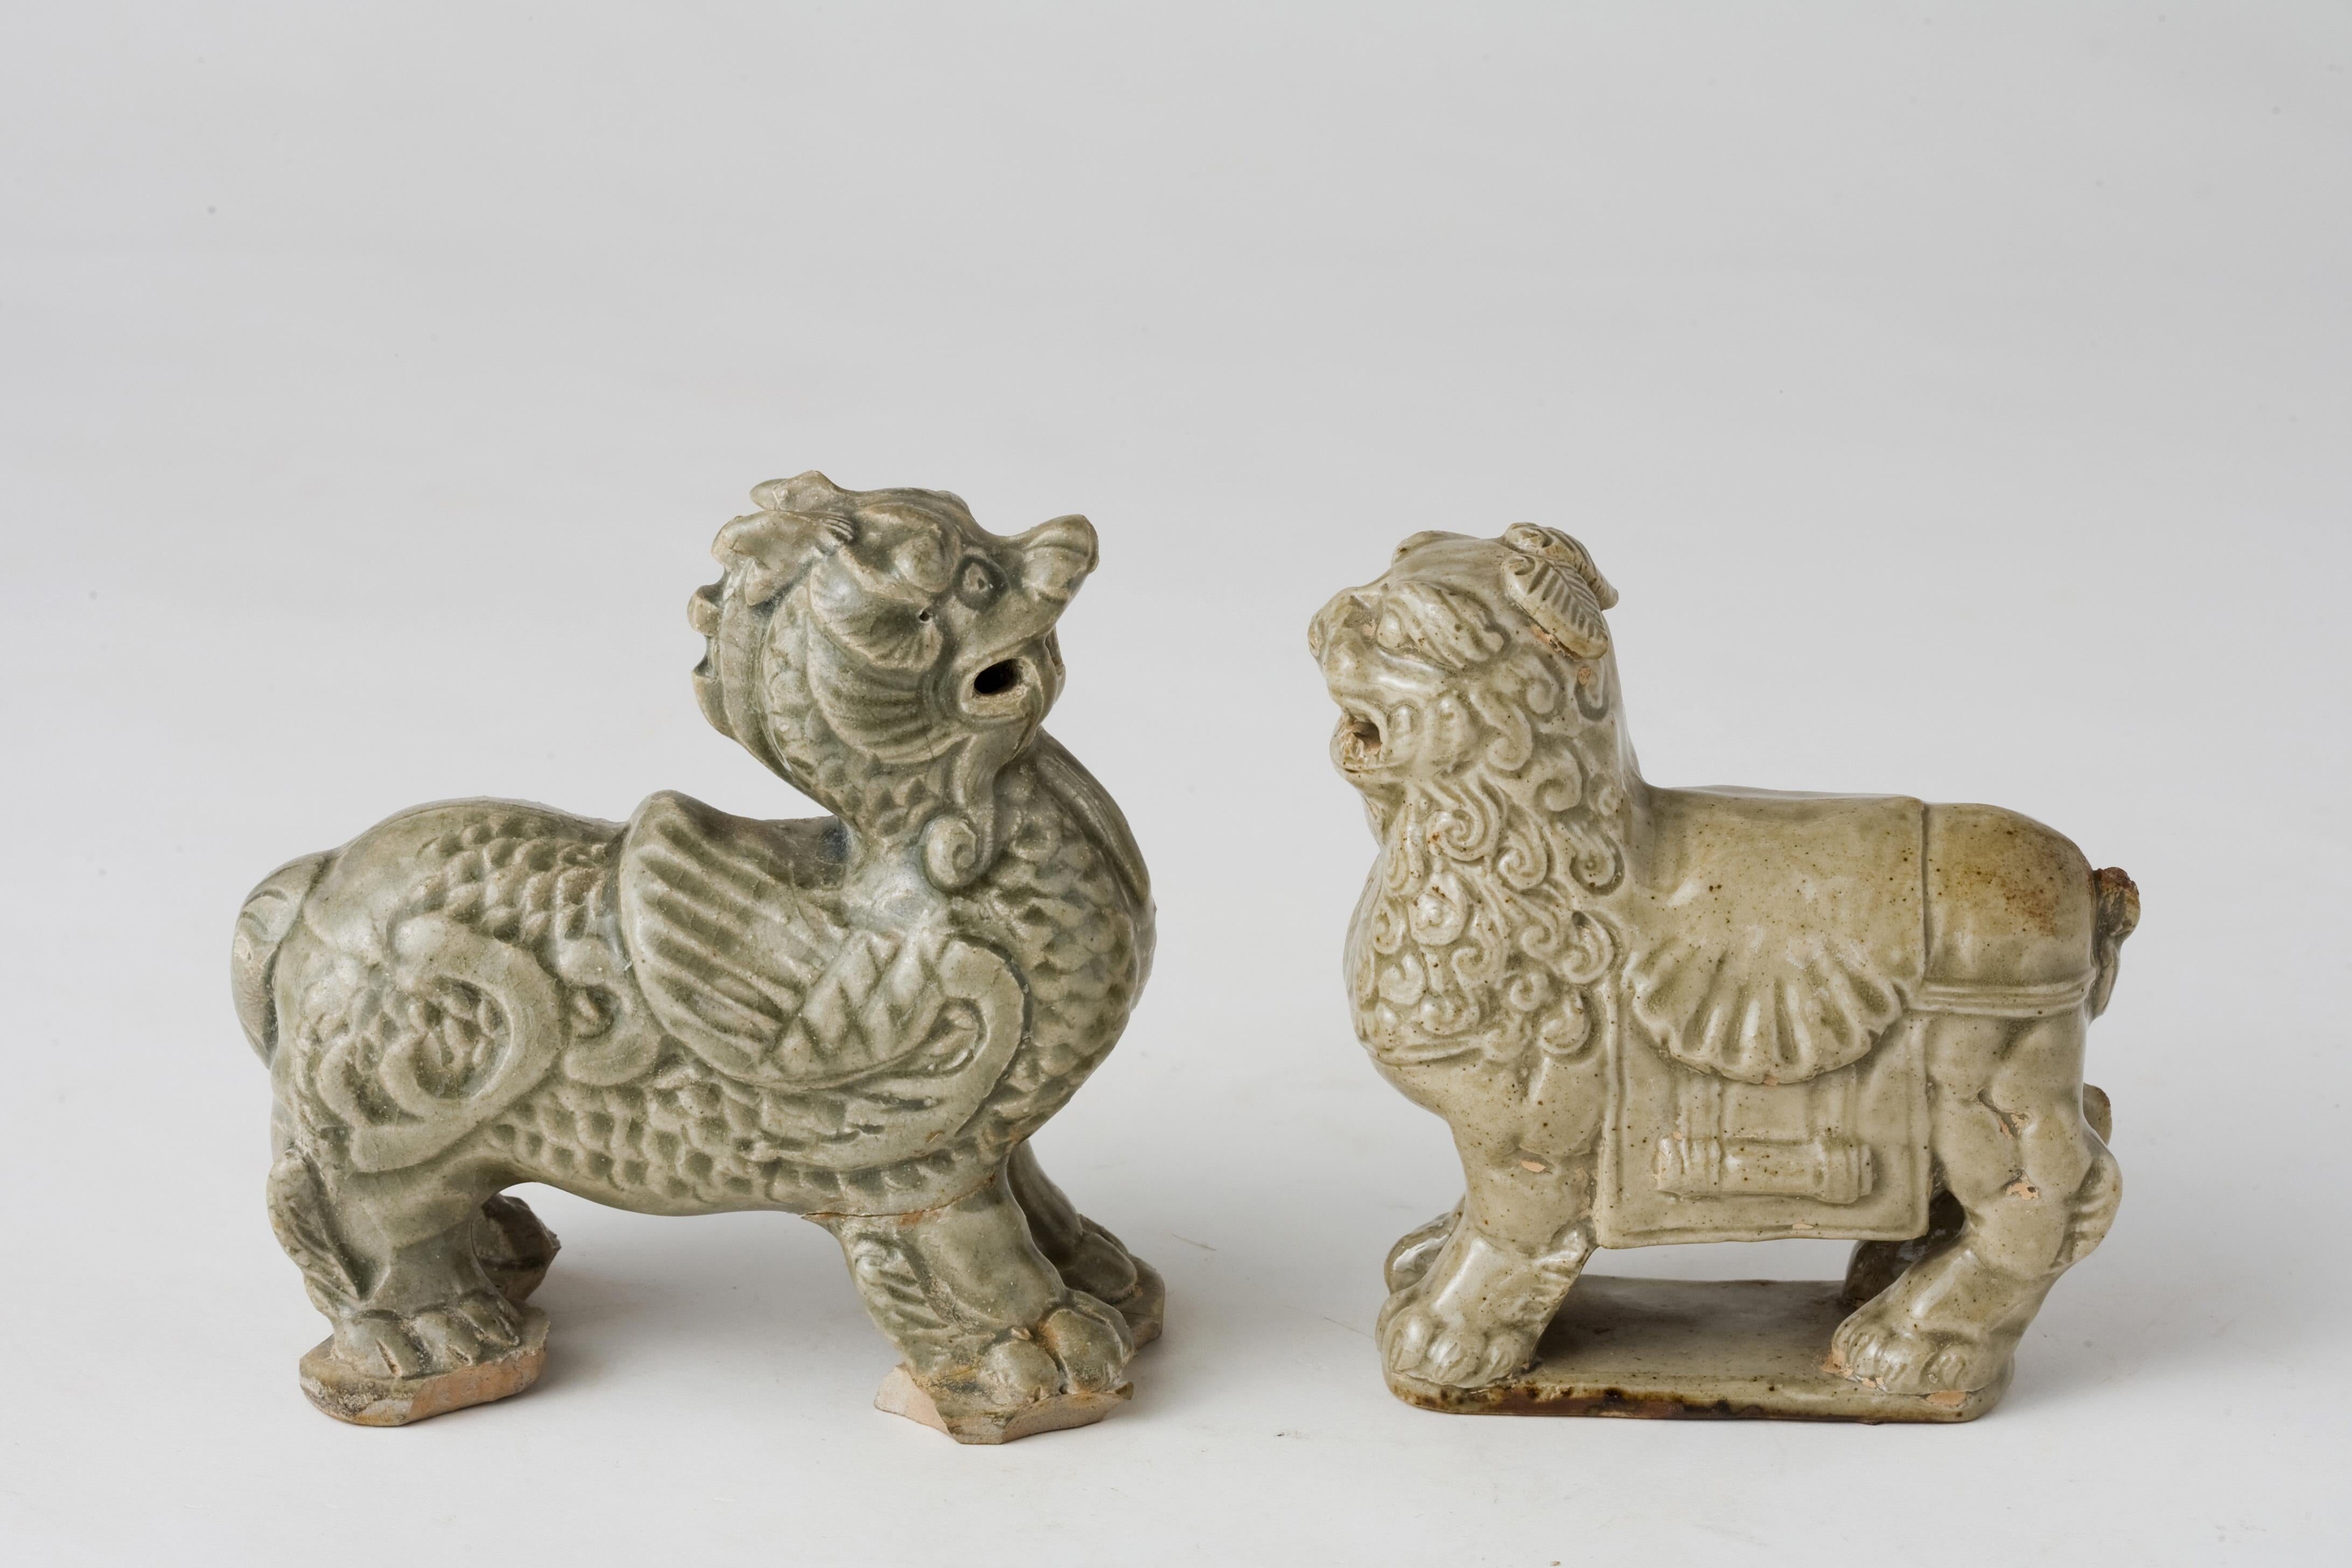 Chinese Export Rare Yue Celadon-Glazed Two Haitai Statues, Western Jin dynasty (265-420) For Sale